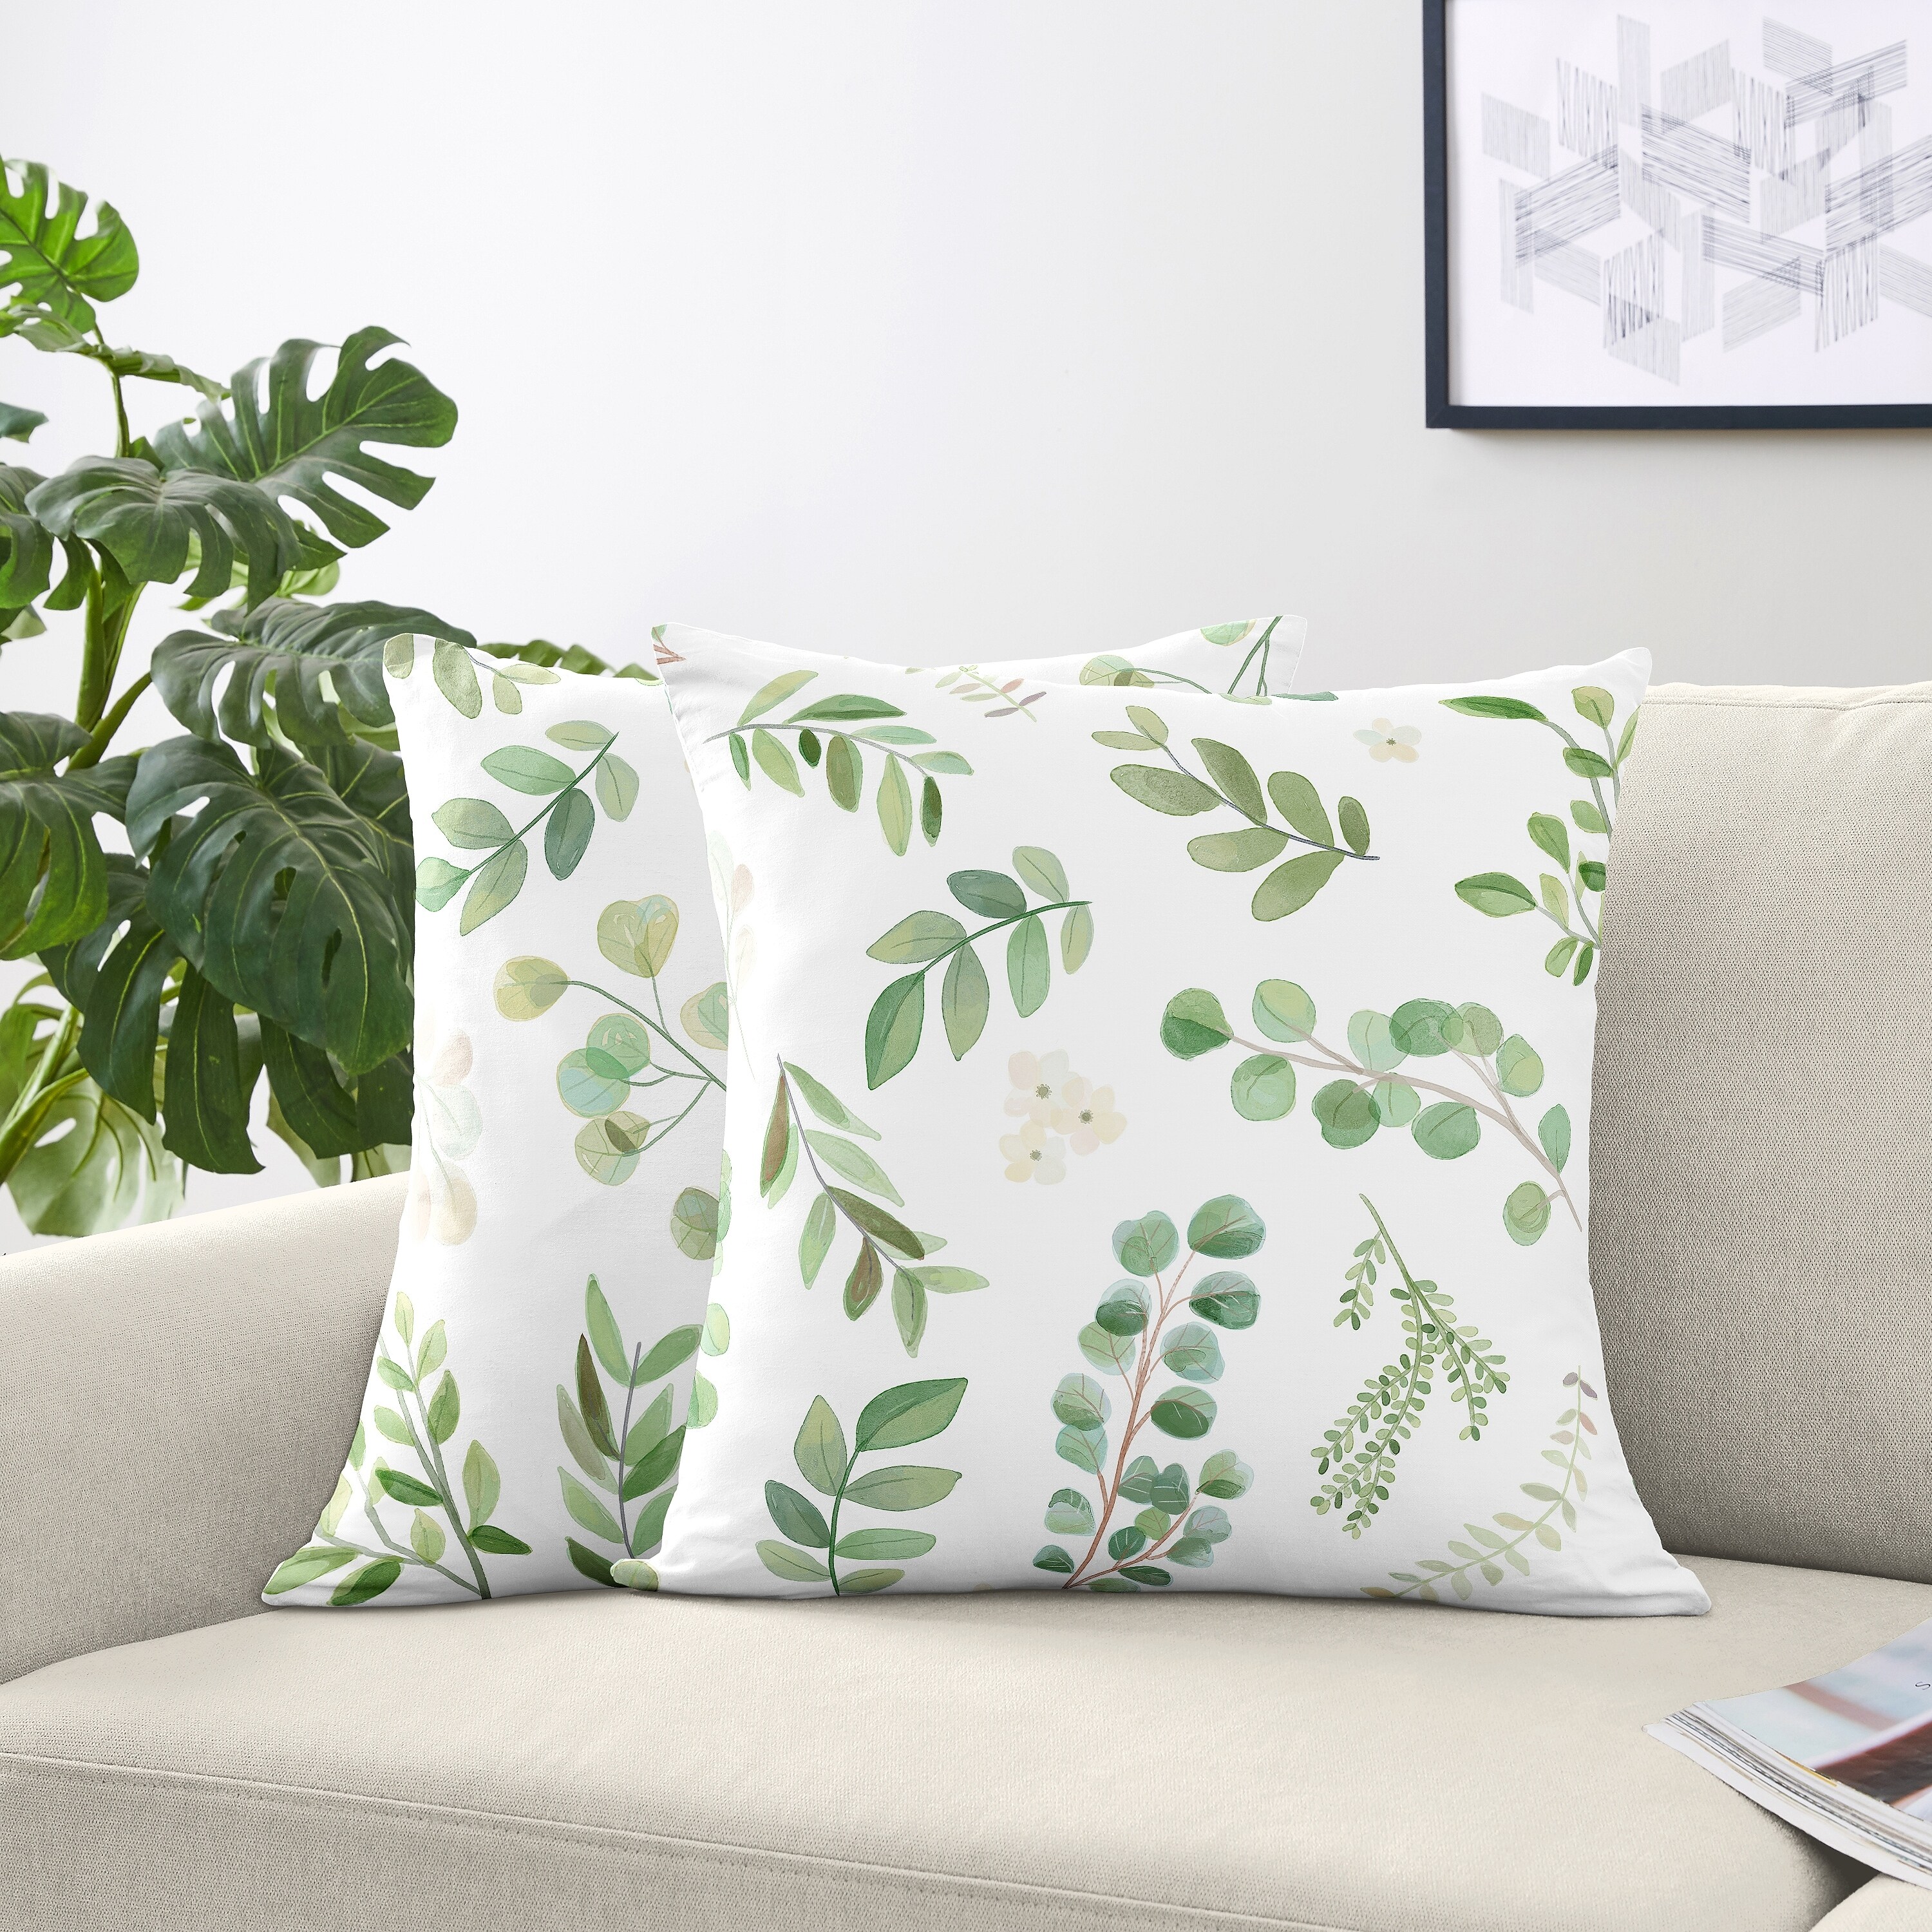 Sweet Jojo Designs Floral Leaf Decorative Accent Throw Pillows - Set of 2 - Green and White Boho Watercolor Botanical Woodland Tropical Garden